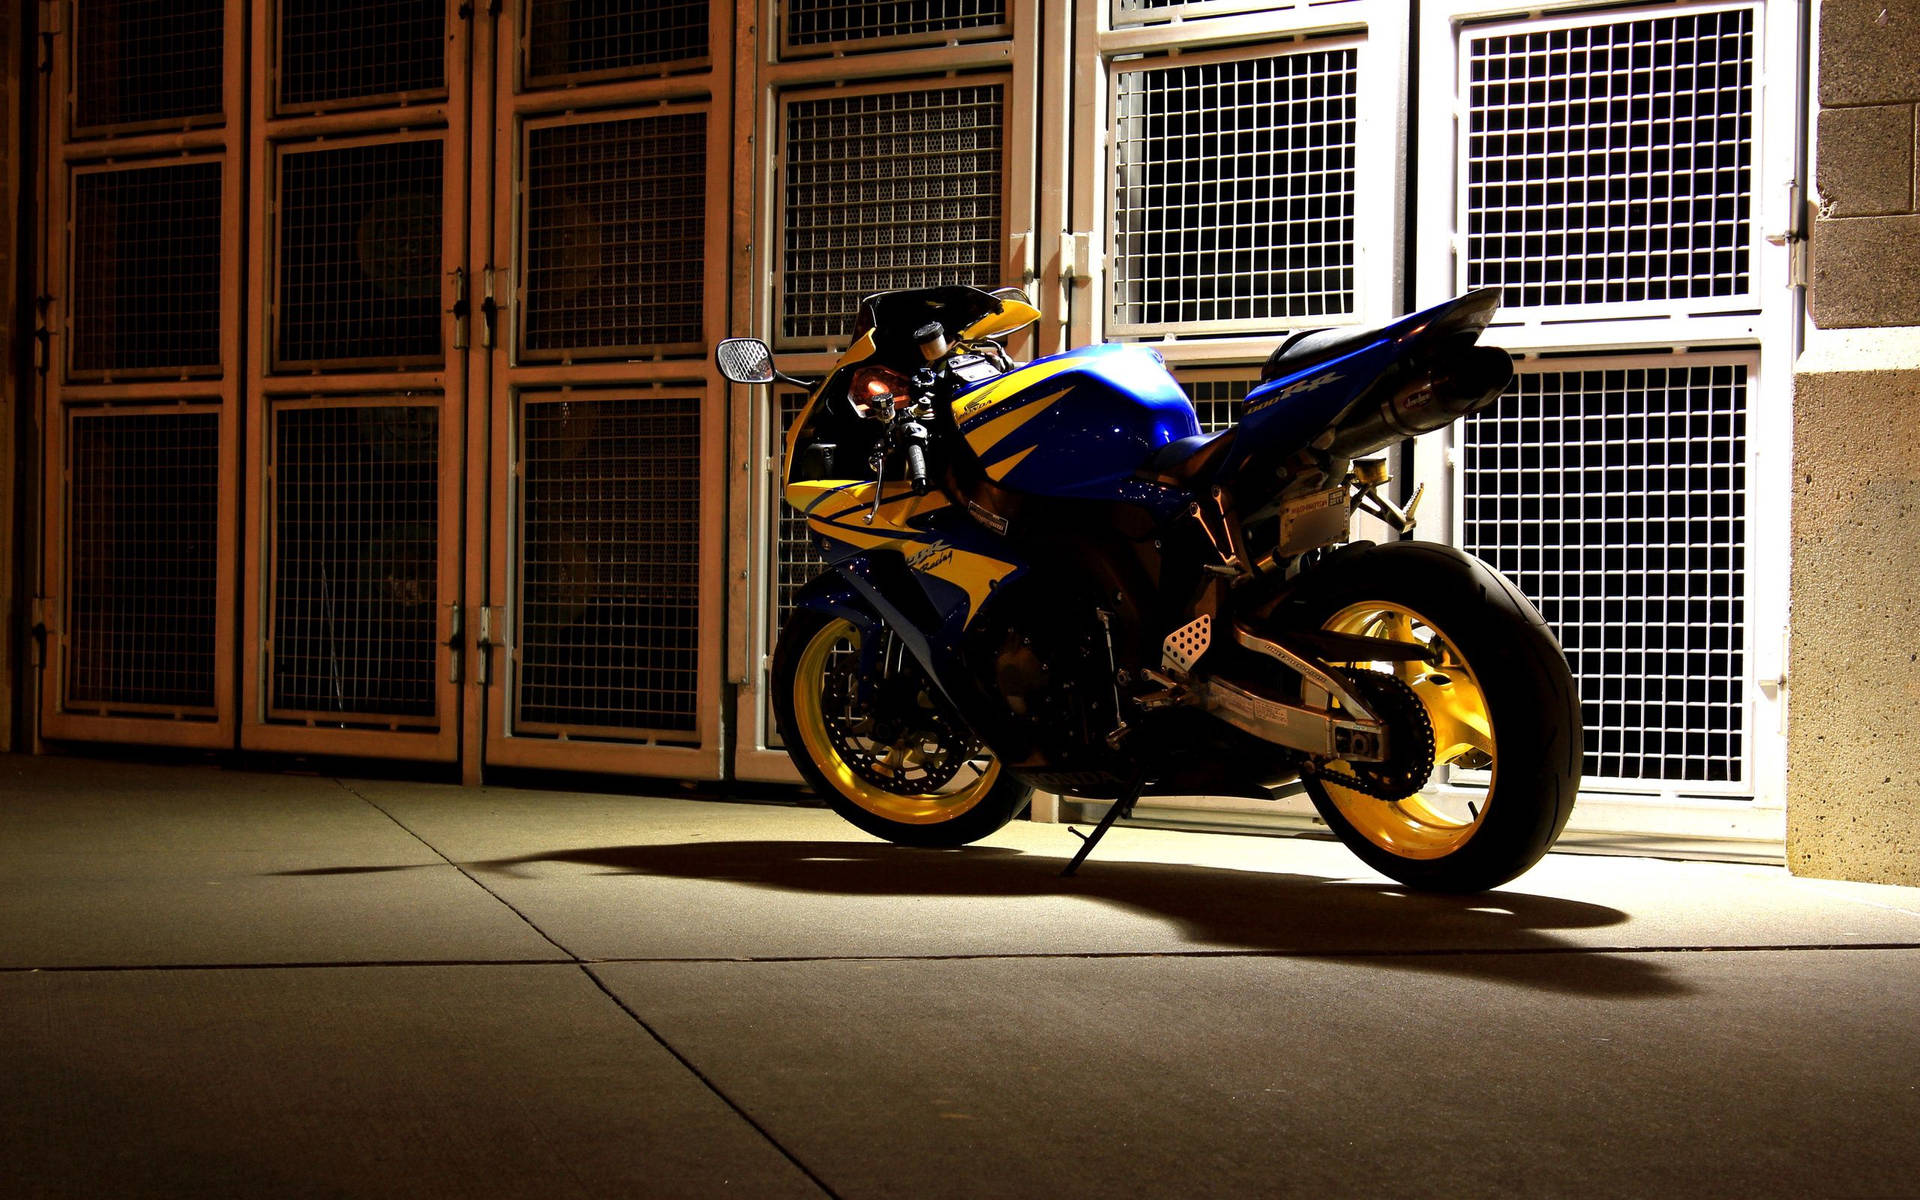 Motorcycle 2560X1600 Wallpaper and Background Image